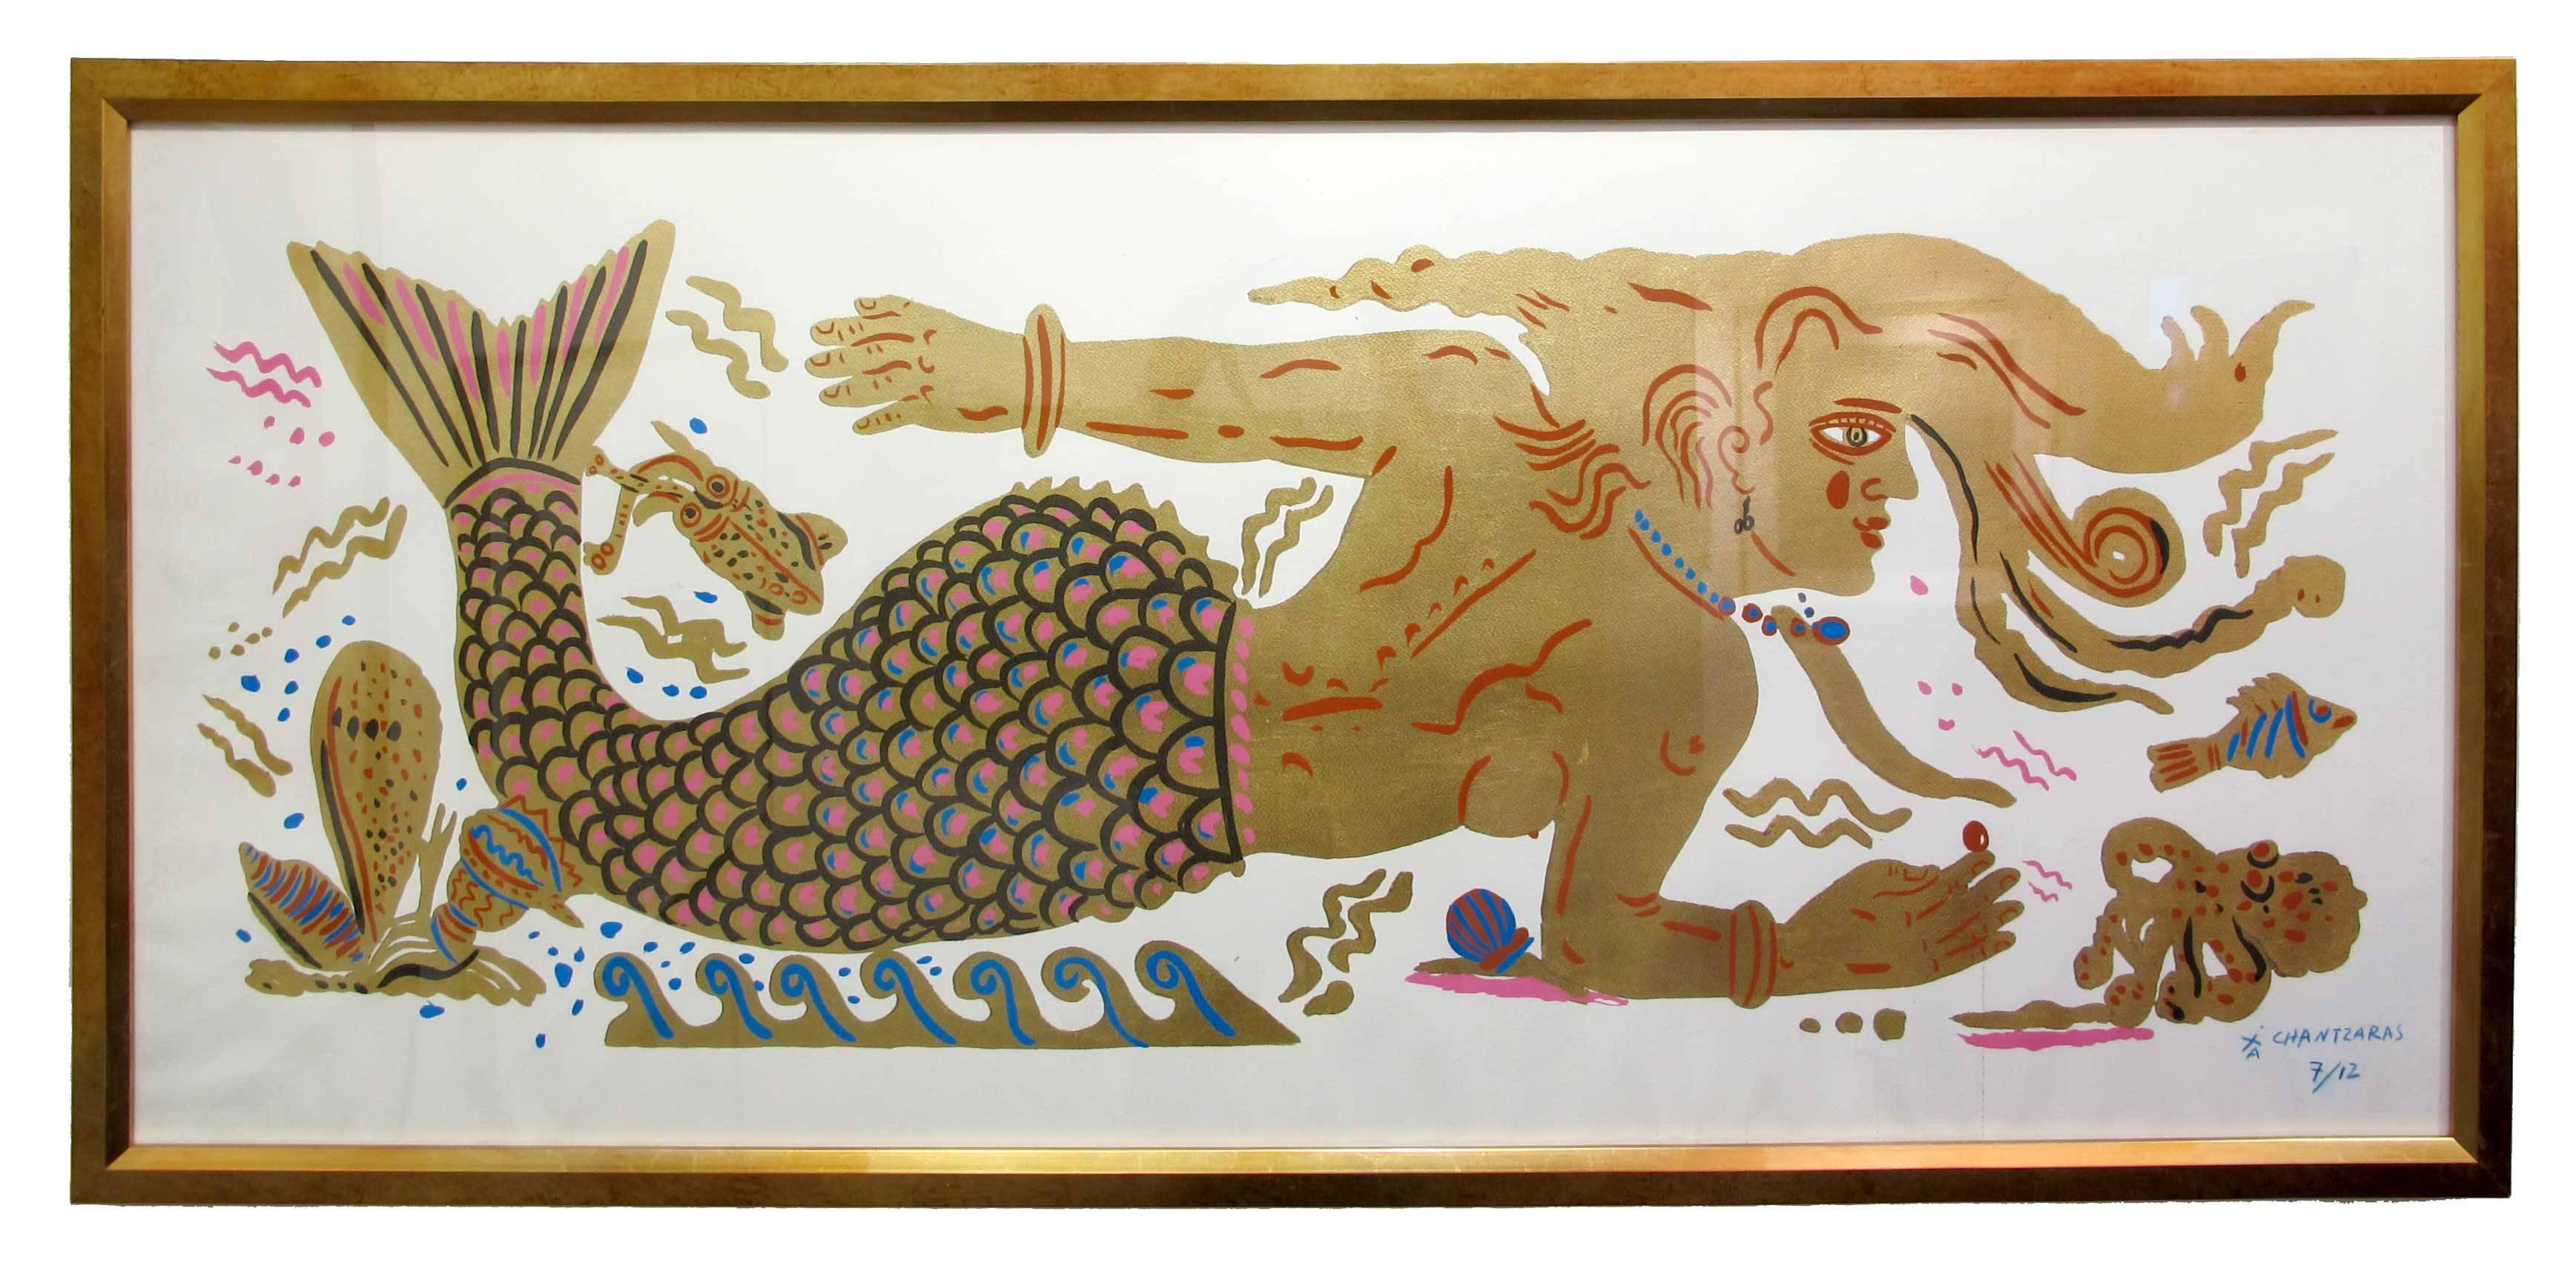 Apostolos Chantzaras Figurative Print - Mermaid Dream, Ancient Greek inspired painting on paper, hand finished gold leaf